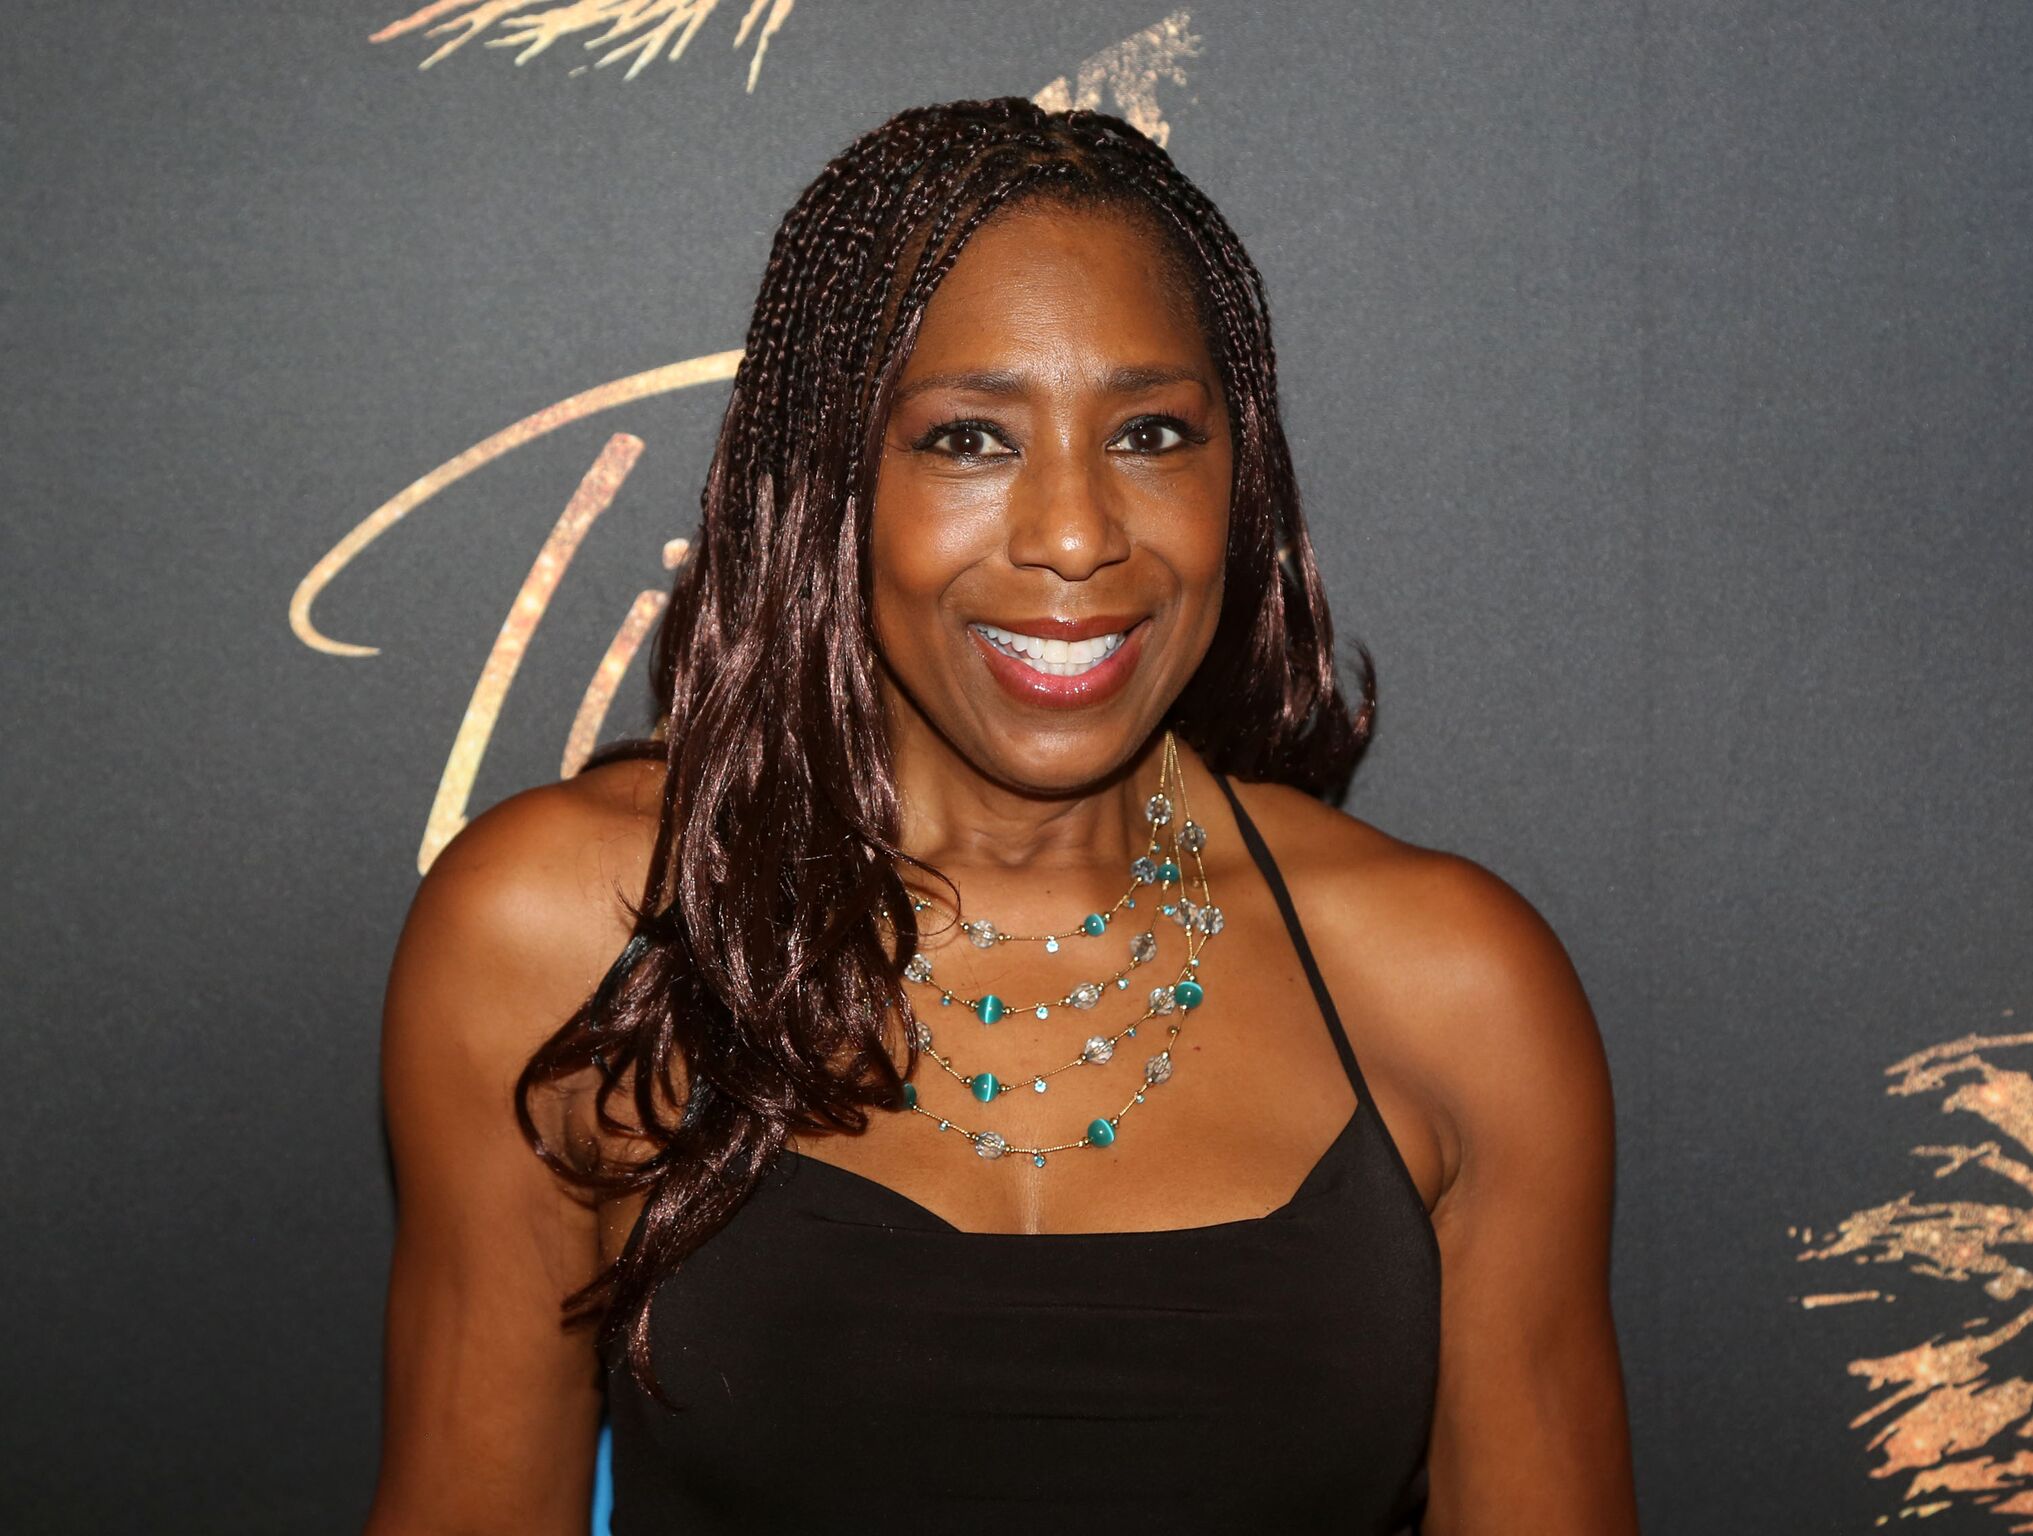 Dawnn Lewis poses at a photo call for the new broadway musical "Tina - The Tina Turner Musical"  | Getty Images